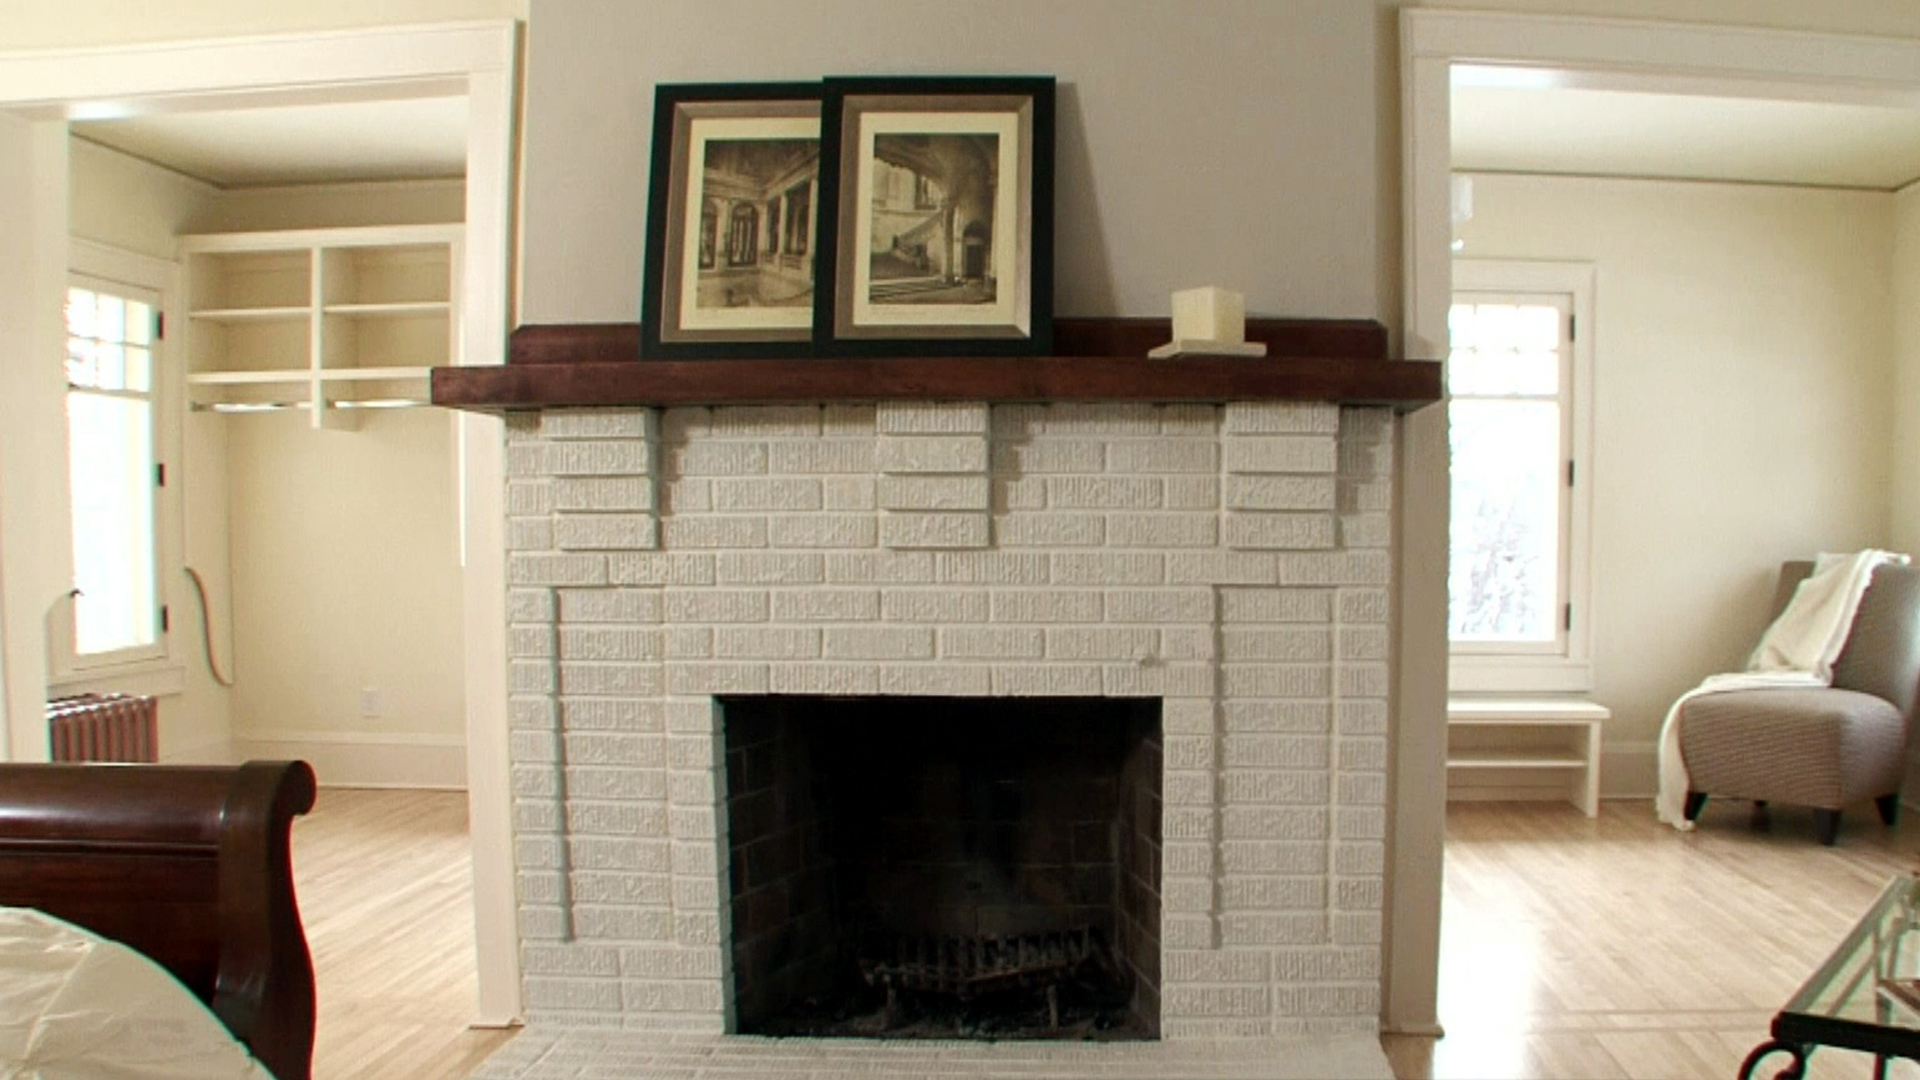 10 Tips for Maintaining a Wood-Burning Fireplace | DIY